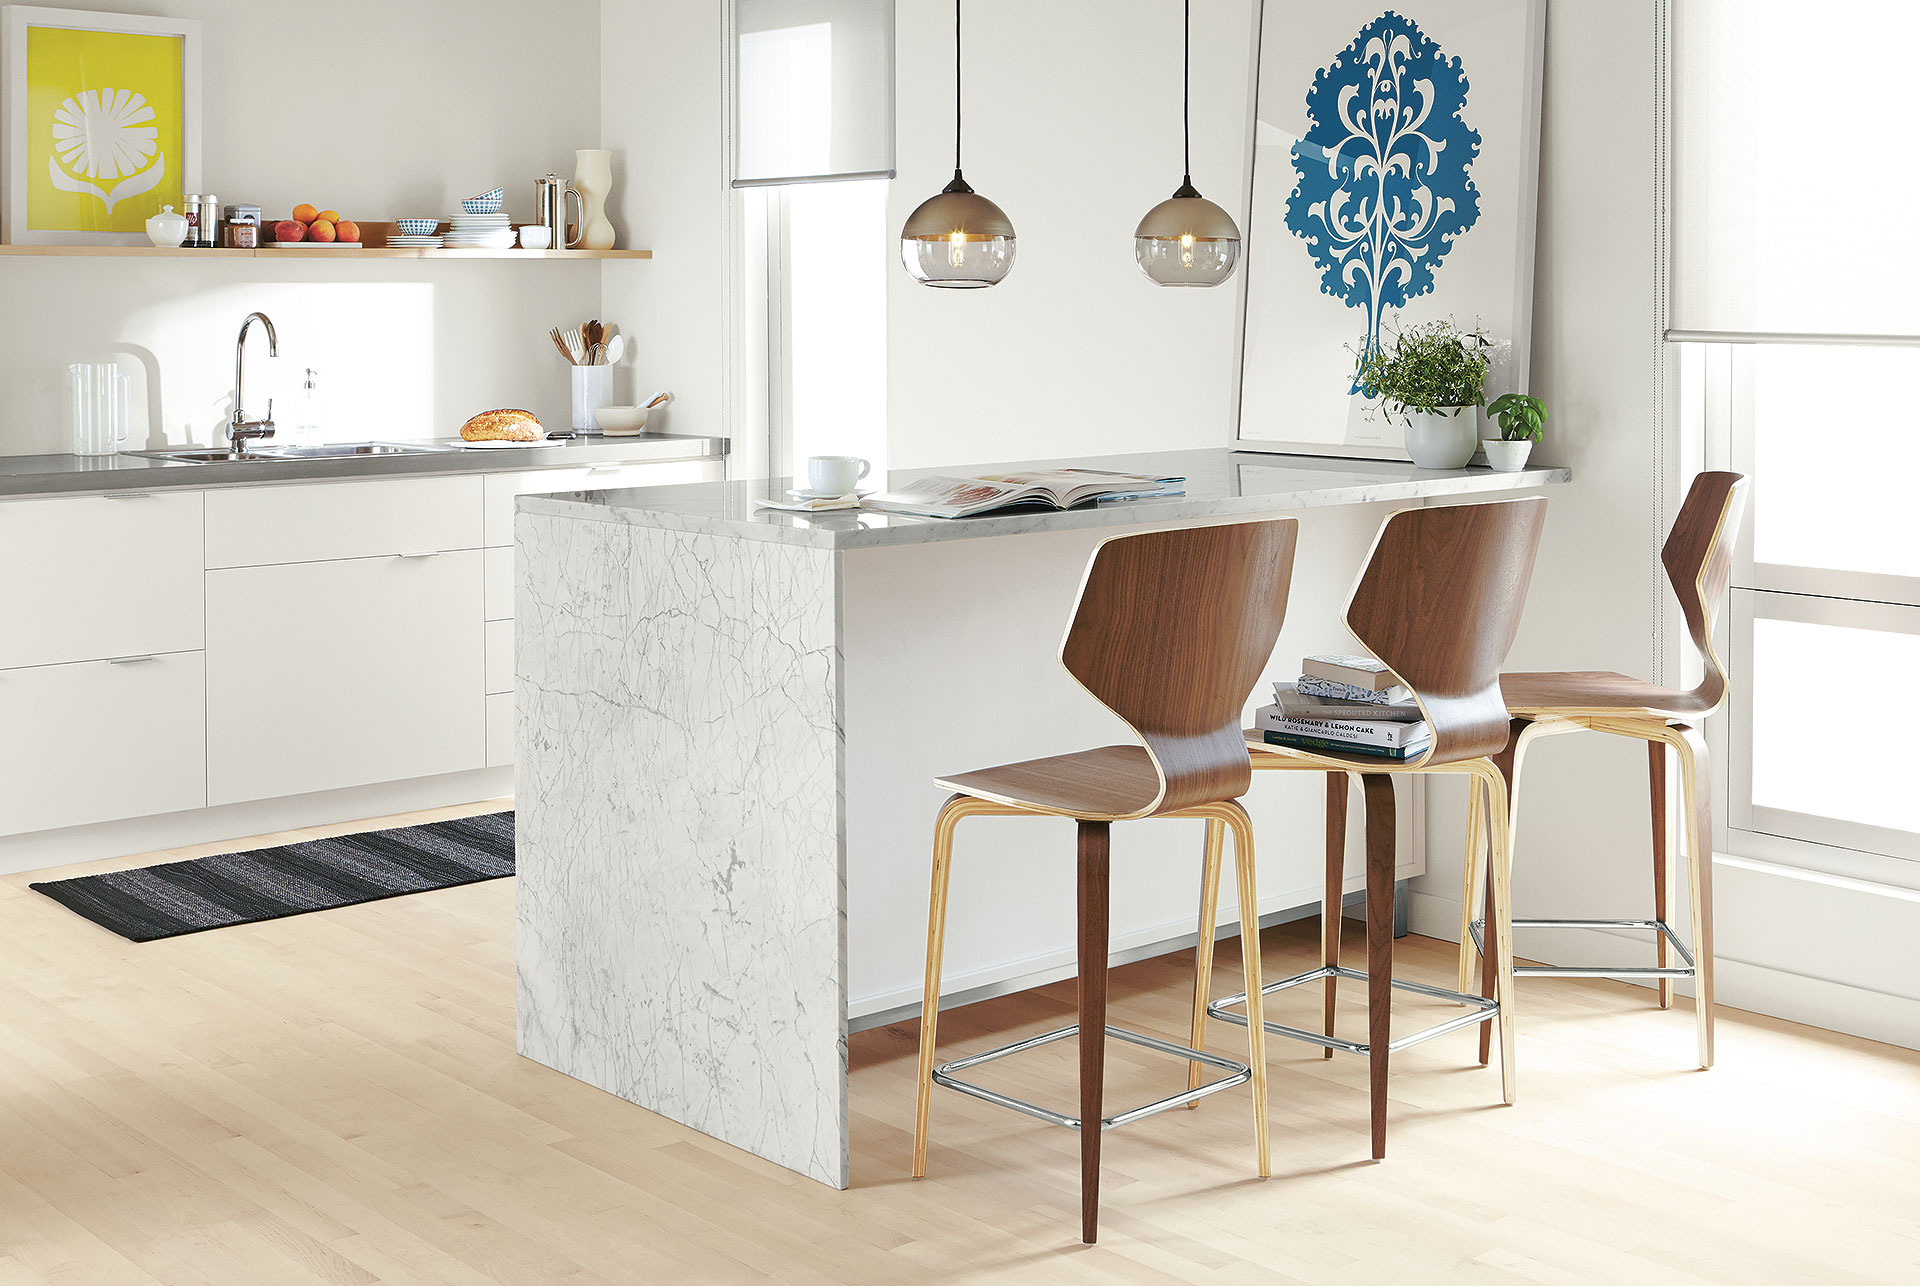 How To Choose Counter Bar Stools, How Tall Should Bar Stool Be For 42 Inch Counter